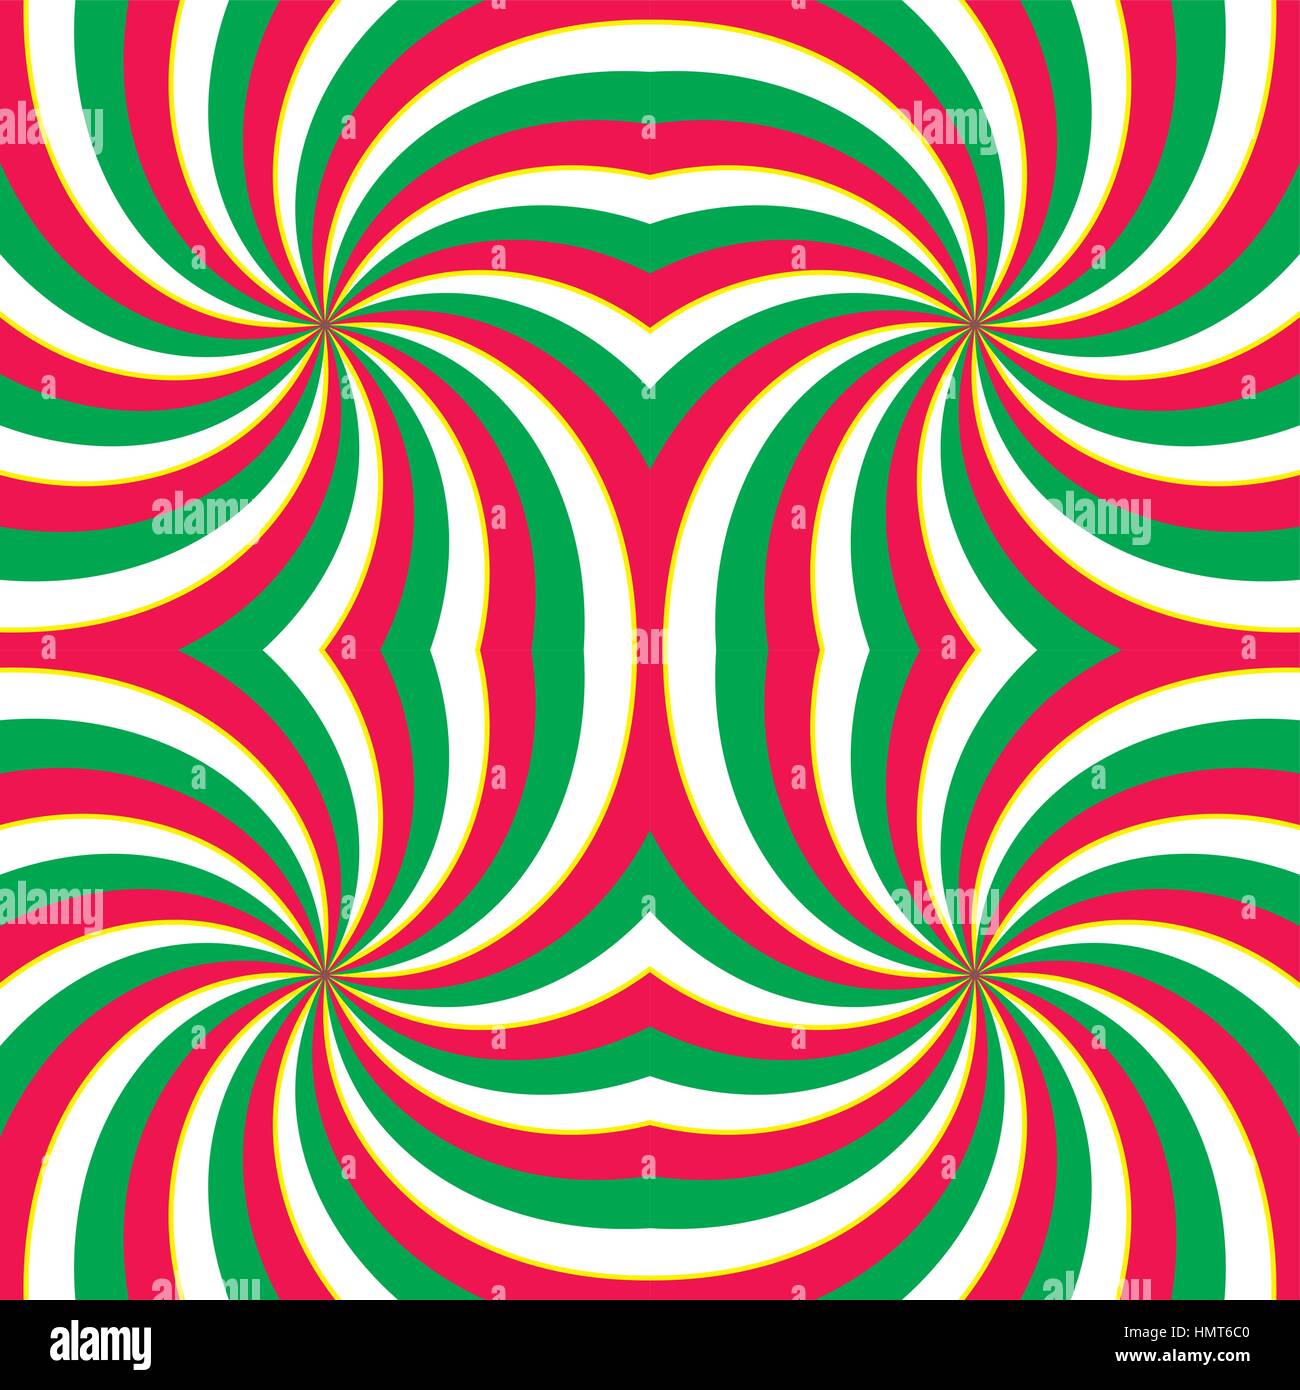 Hypnotic swirling radial vortex background. Red, green and white stripes swirling into square. Vector illustration in EPS8 format. Stock Vector